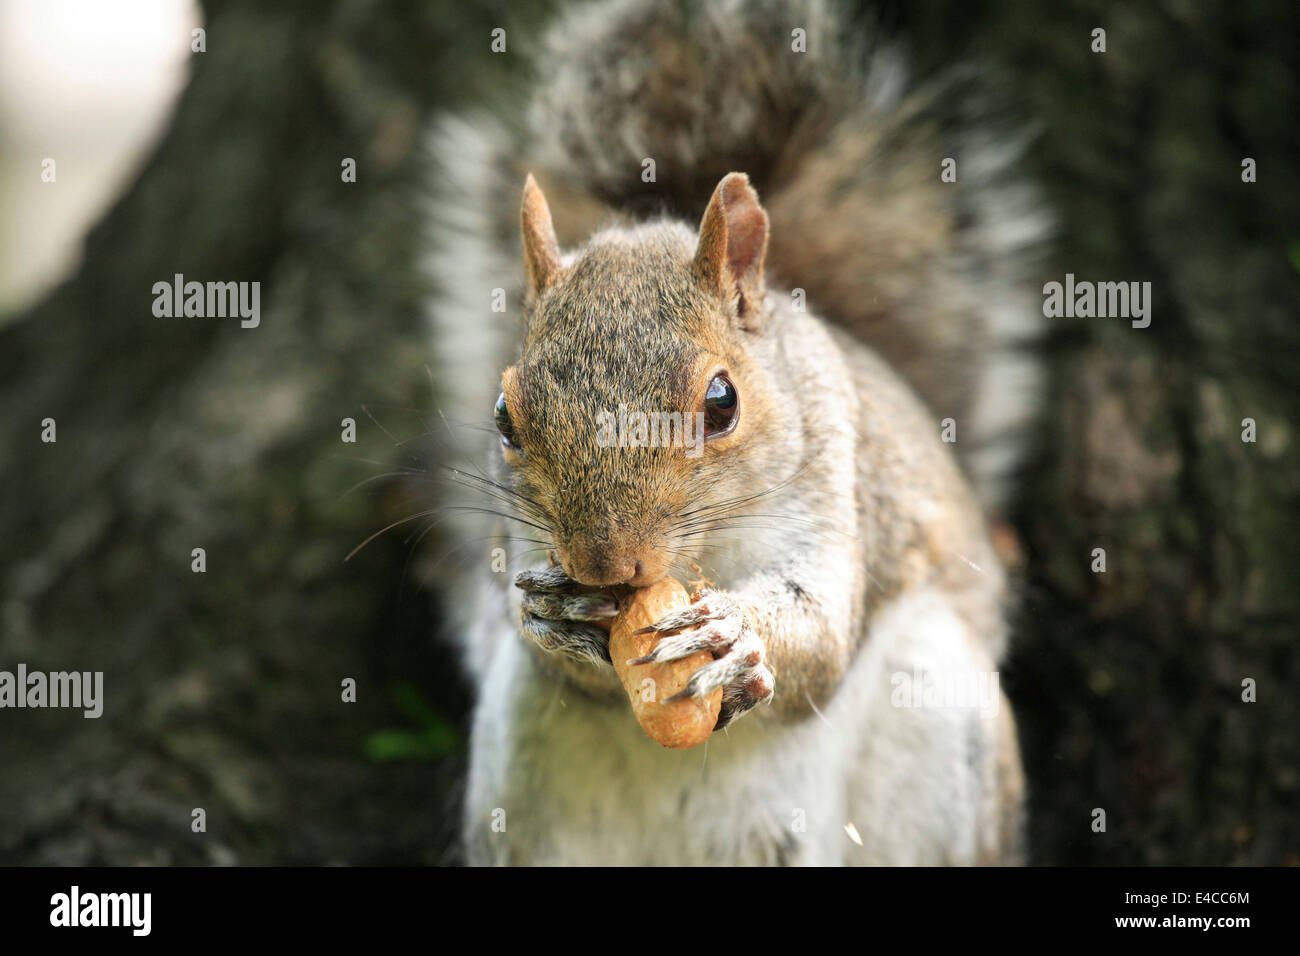 Squirrel, family of Sciuridae or rodent eating nut.  Stock Photo